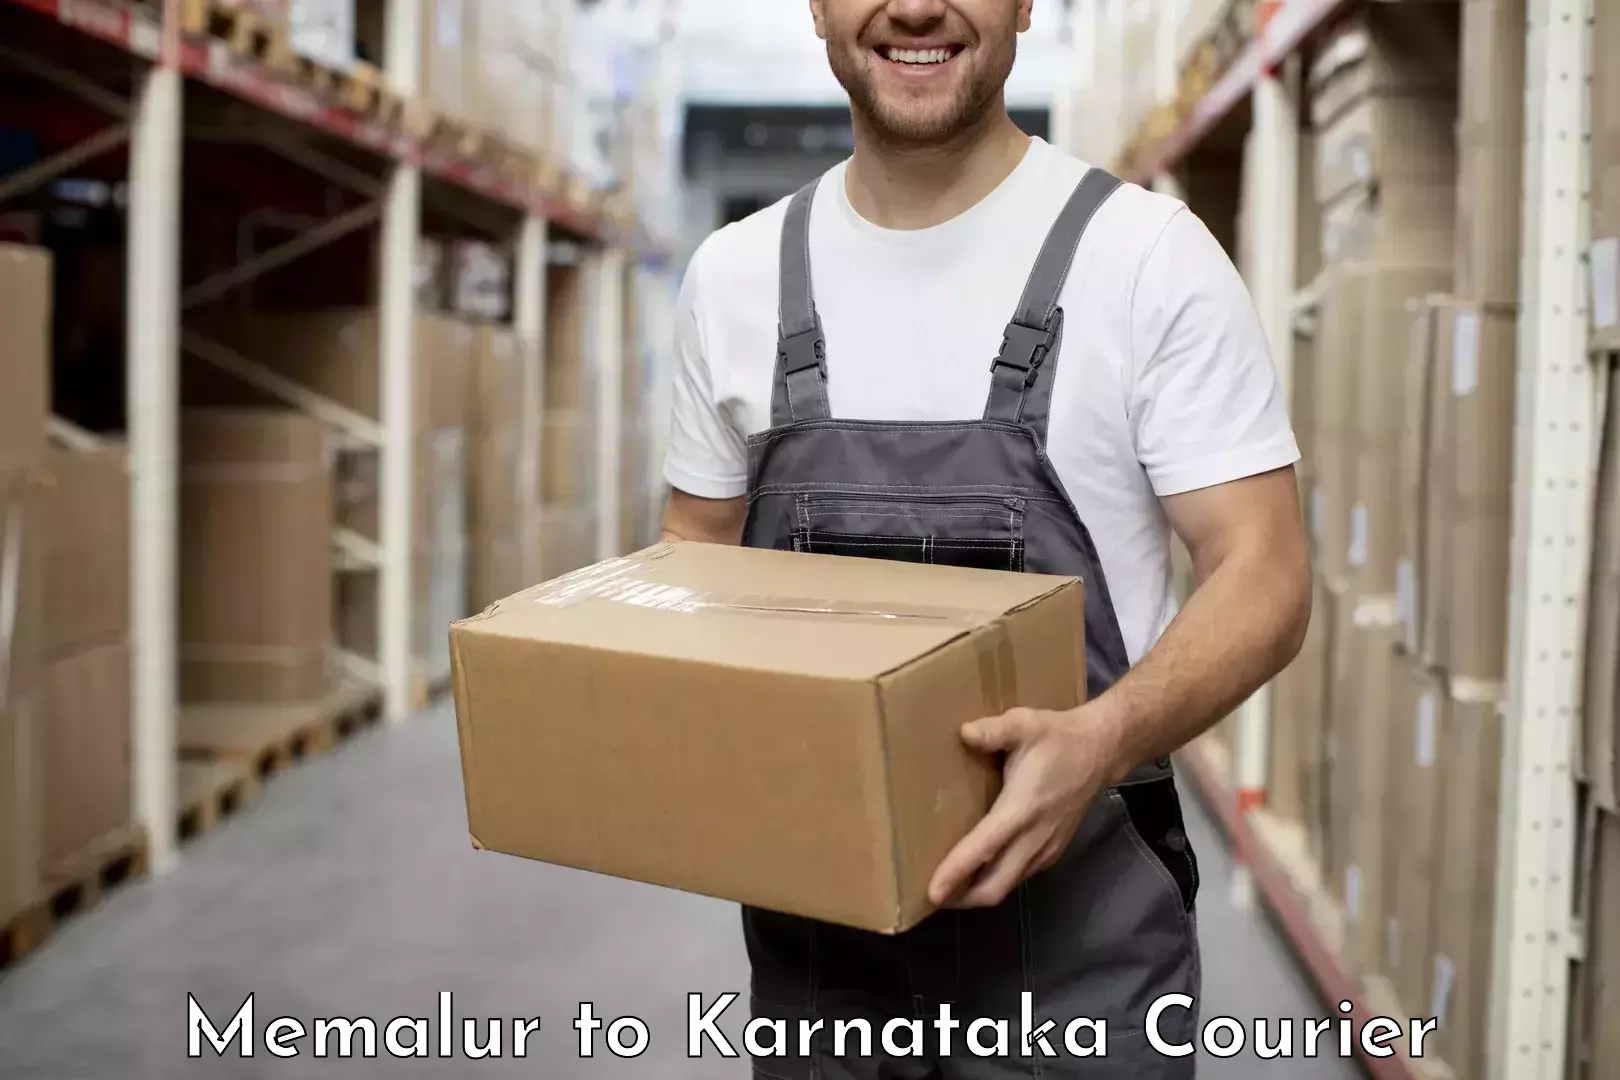 End-to-end delivery Memalur to Eedu